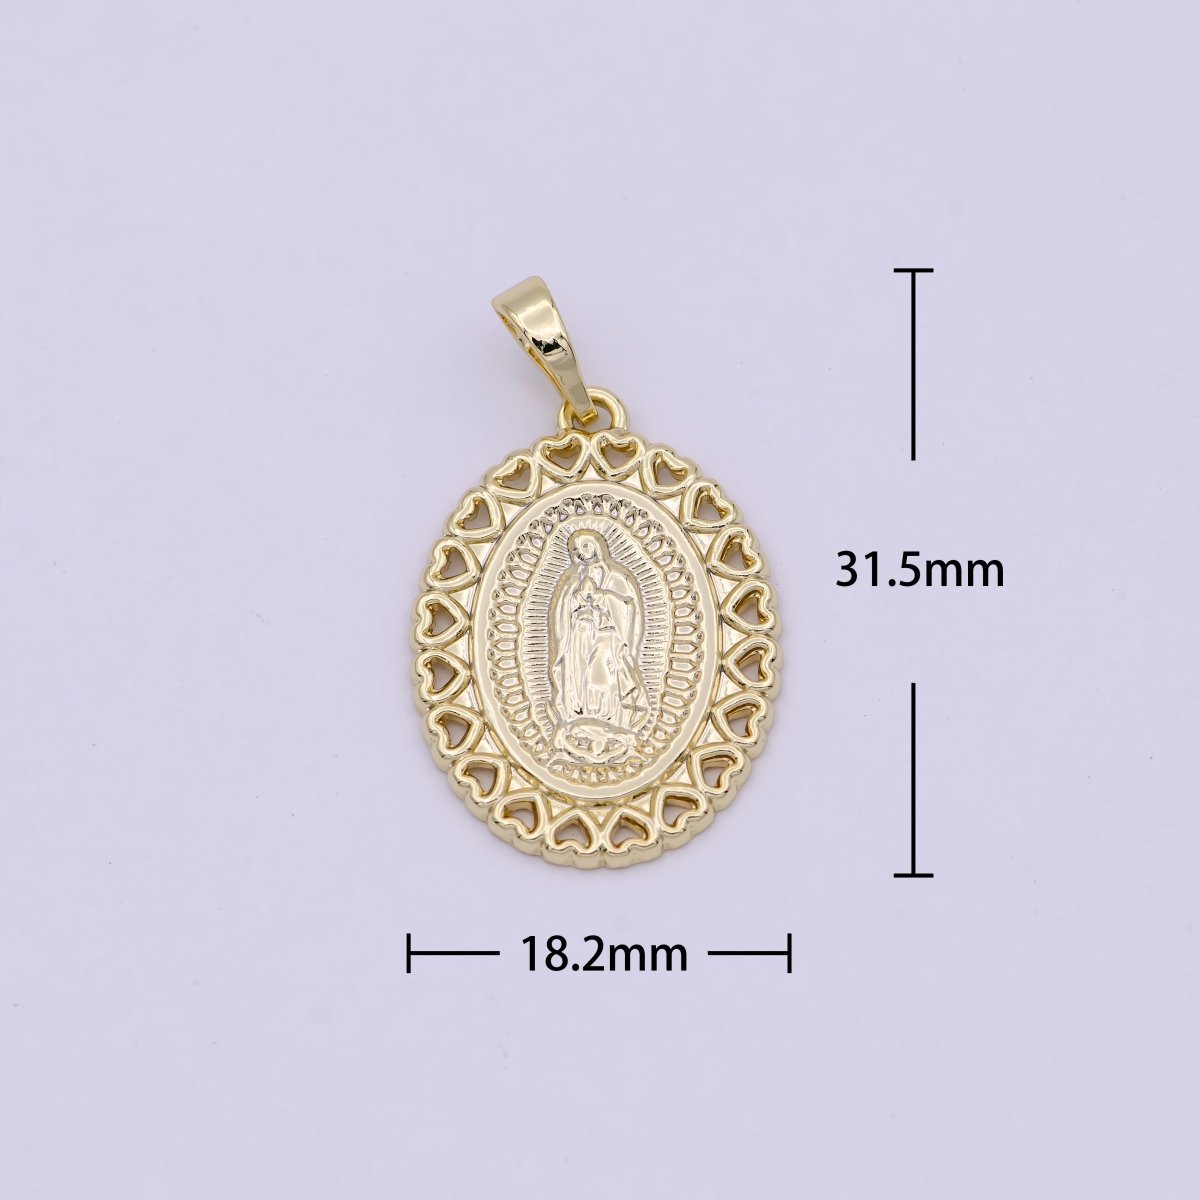 14K Gold Filled Our Lady of Guadalupe Charm Necklace Small Dainty Oval Gold Virgin Mary Pendant Necklace Women Religious Jewelry Gift H-475 - DLUXCA